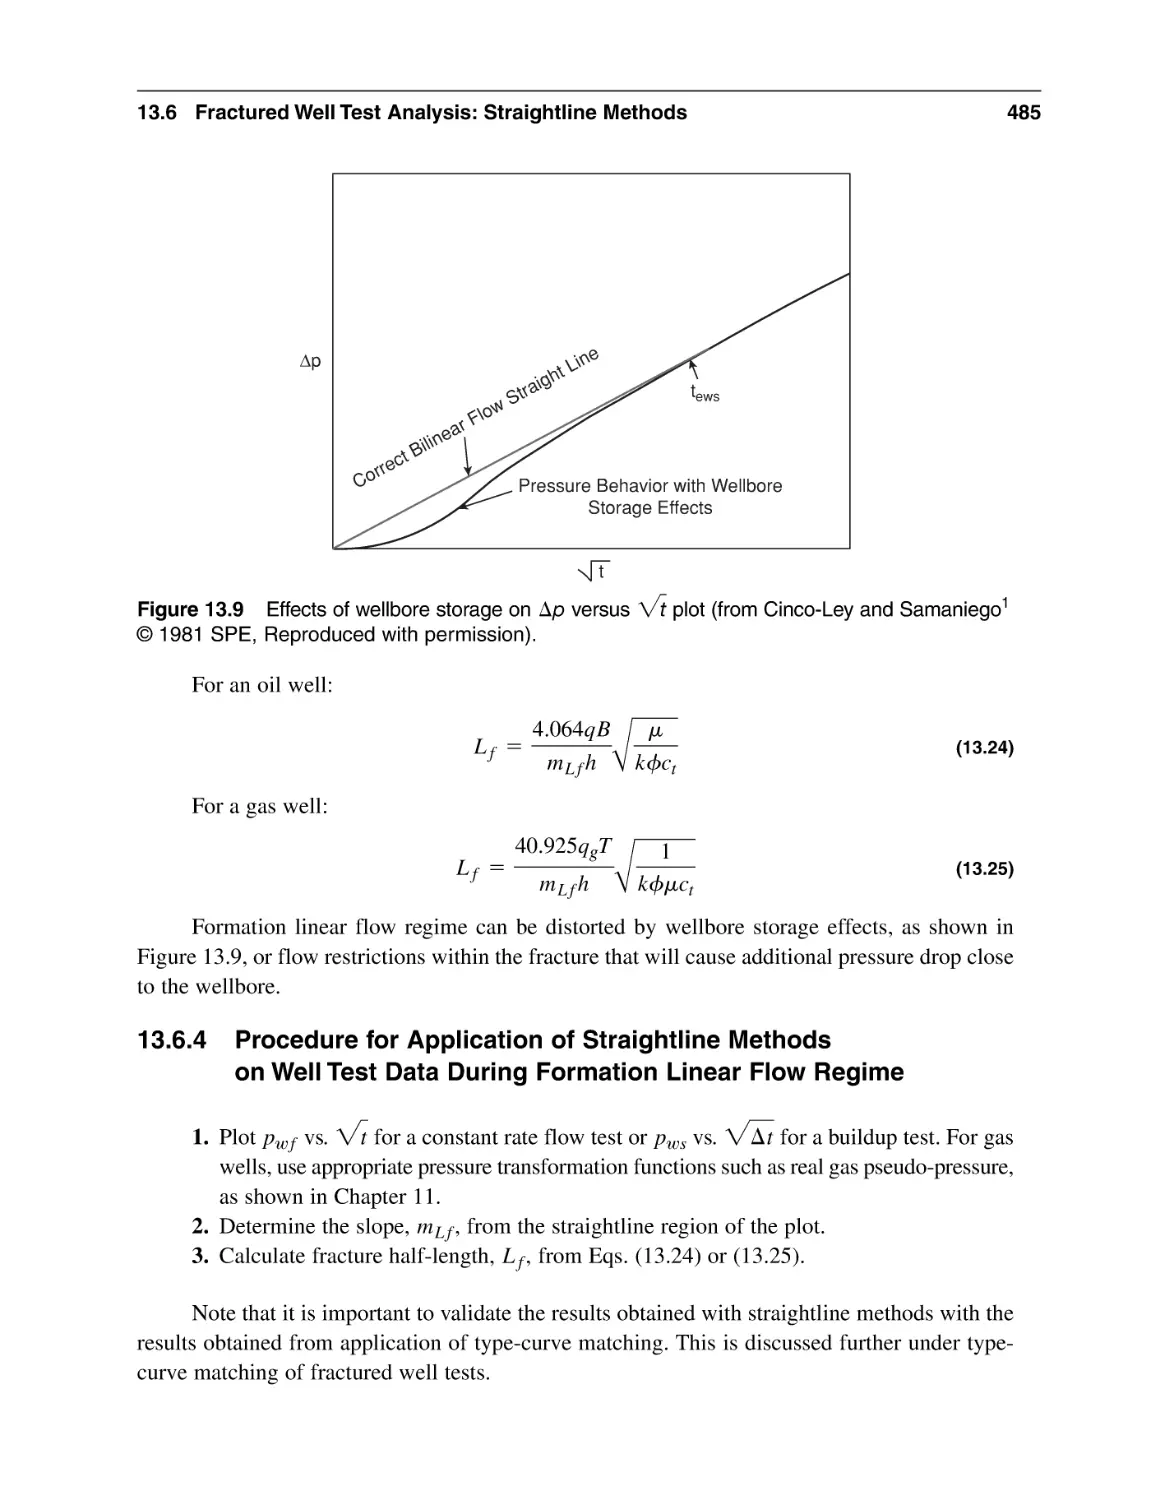 13.6.4 Procedure for Application of Straightline Methods on Well Test Data During Formation Linear Flow Regime